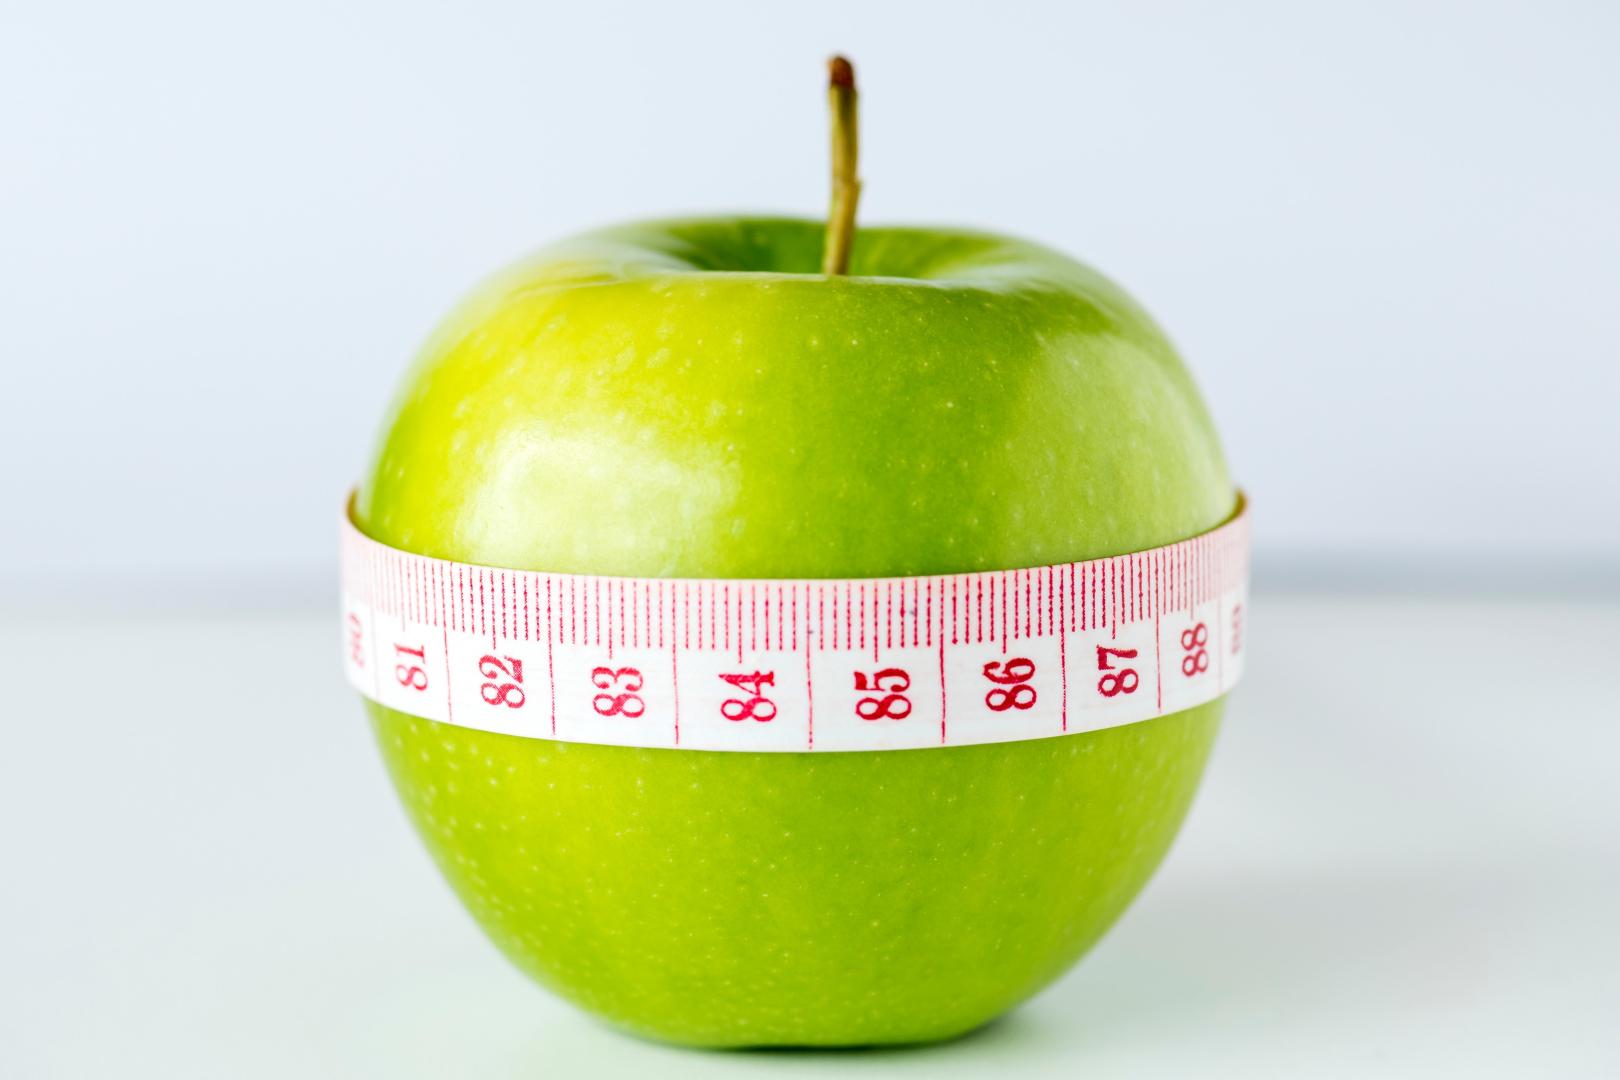 Apple with a tape measure around it